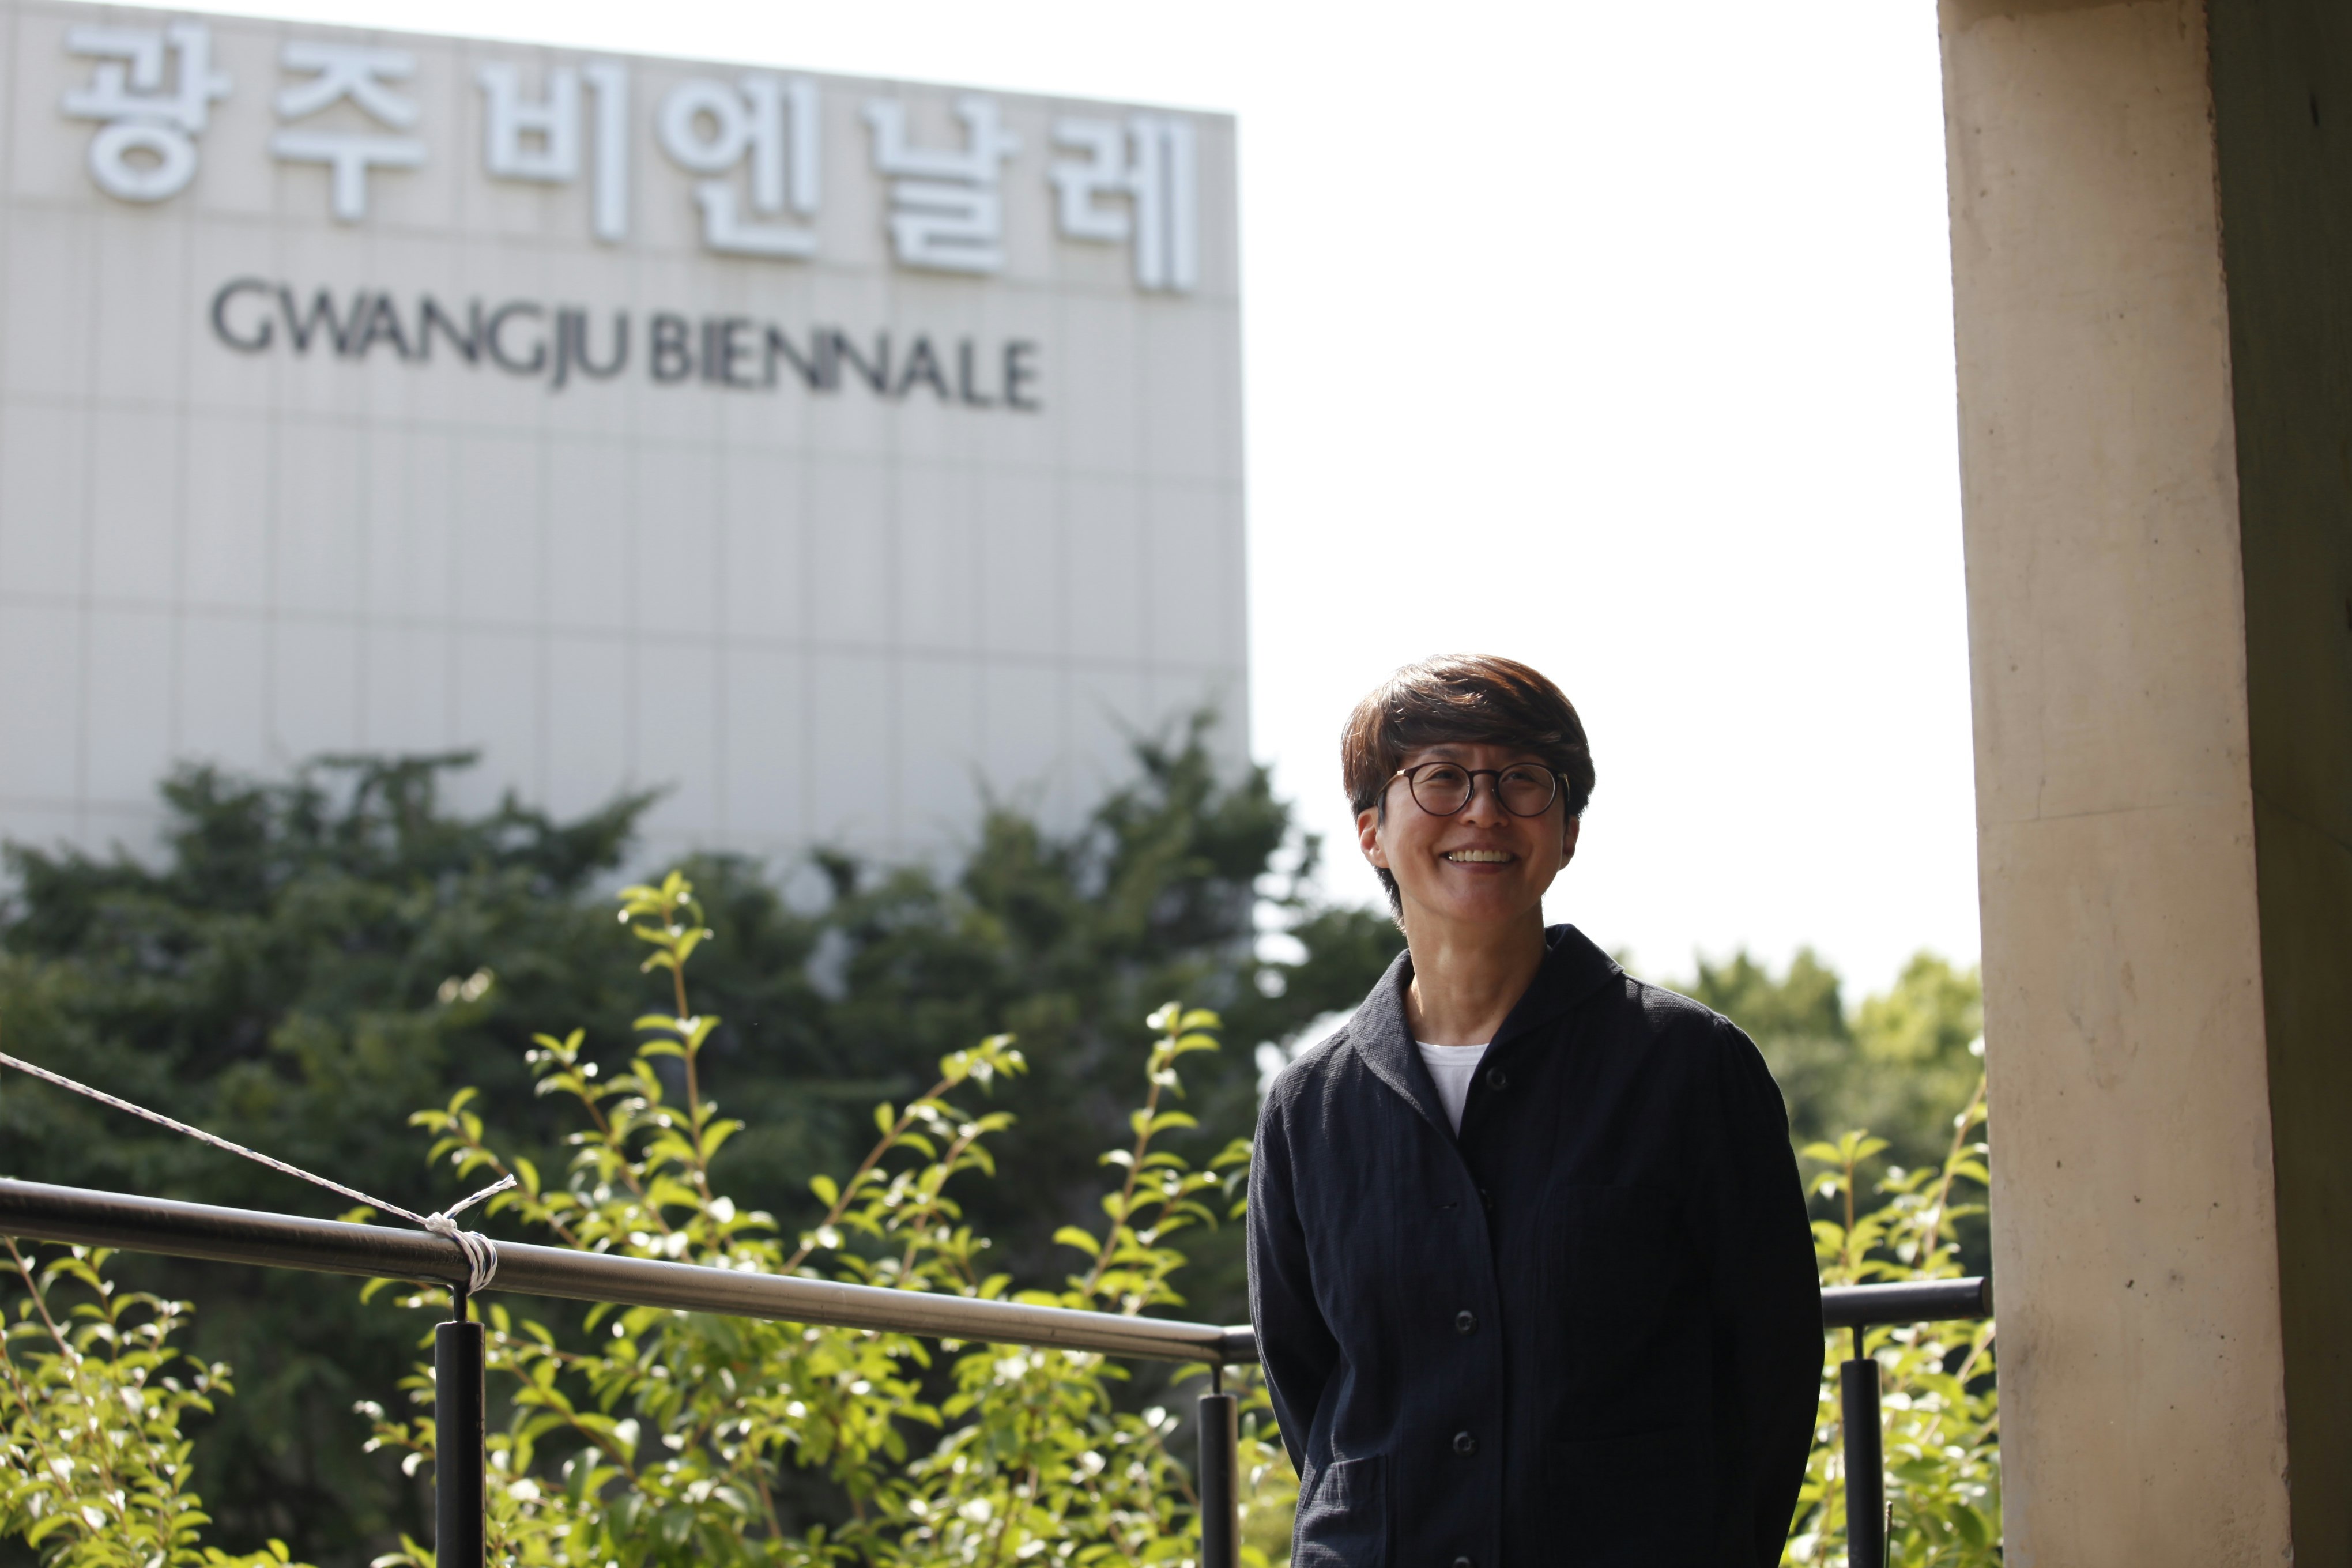 A South Korean curator with a short haircut smiles in front of a large building with a sign that reads, 'Gwangju Biennale', in English letters and Hangul.